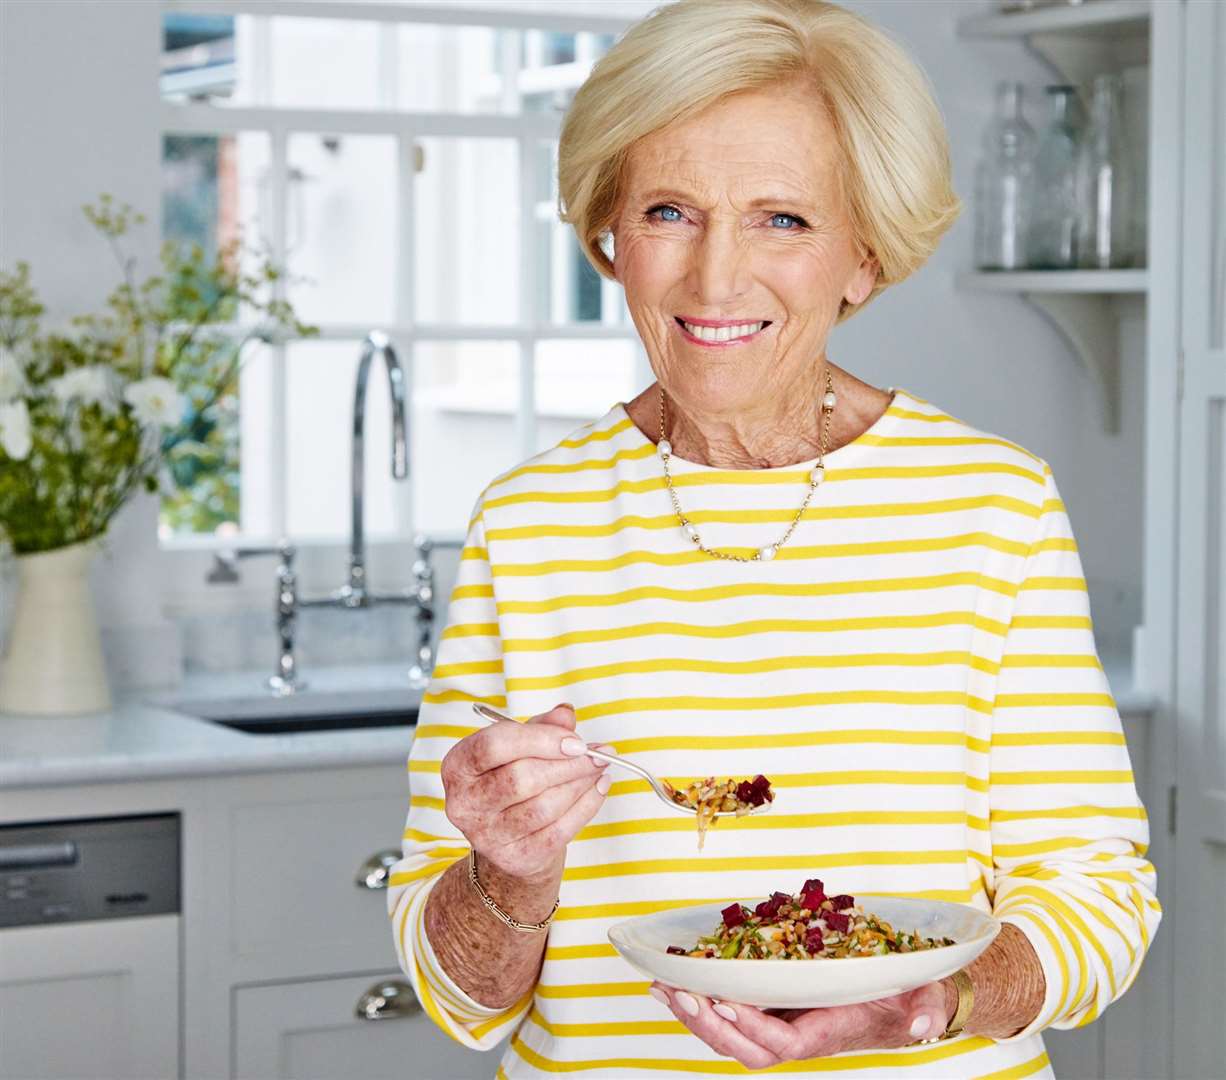 Dame Mary Berry will lead the judging panel